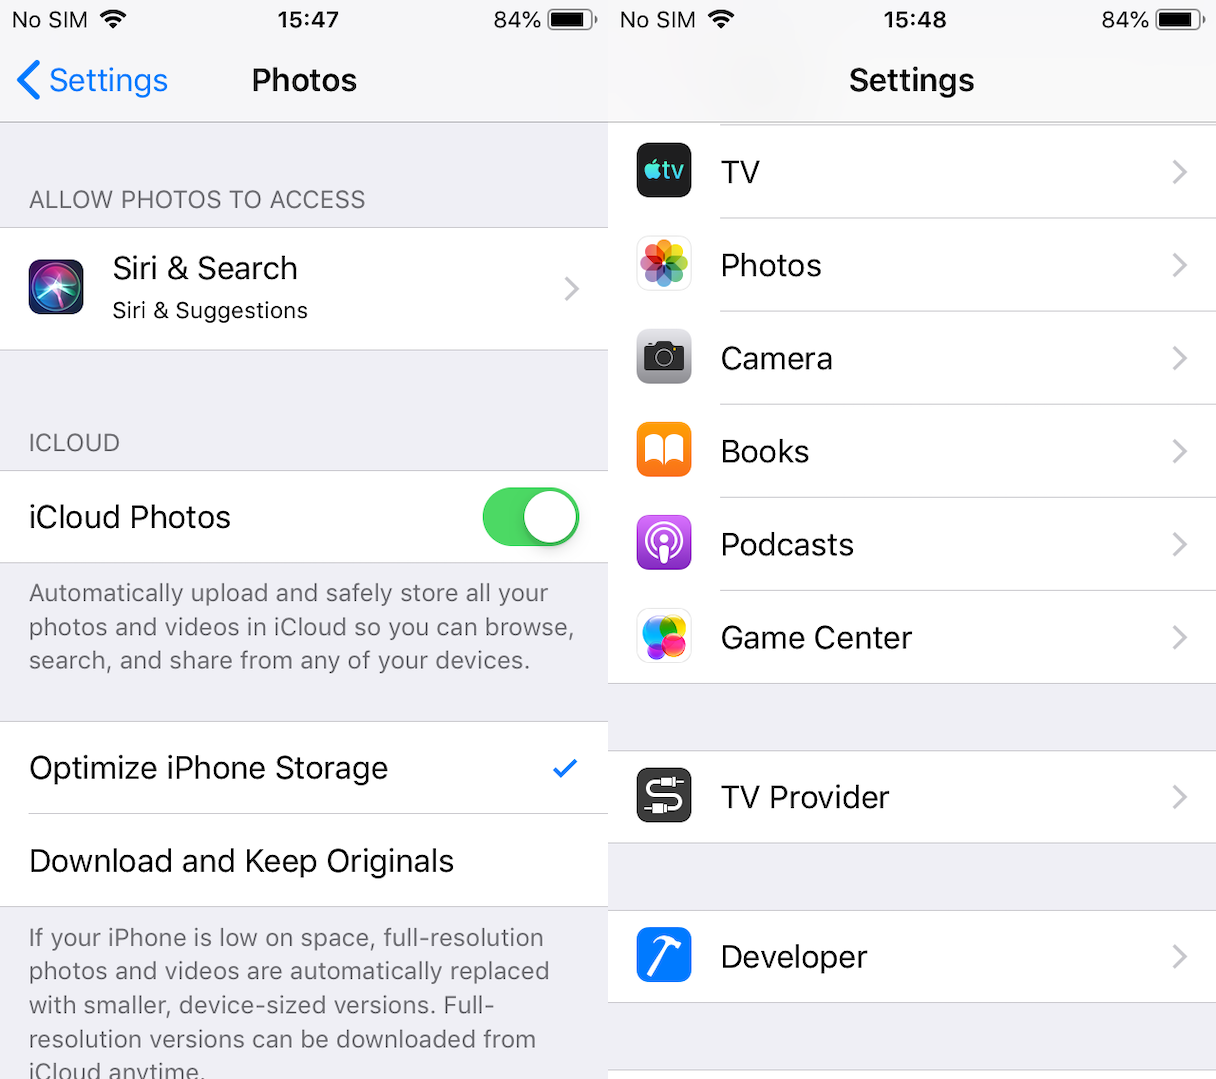 How to upload photos to iCloud from your iPhone